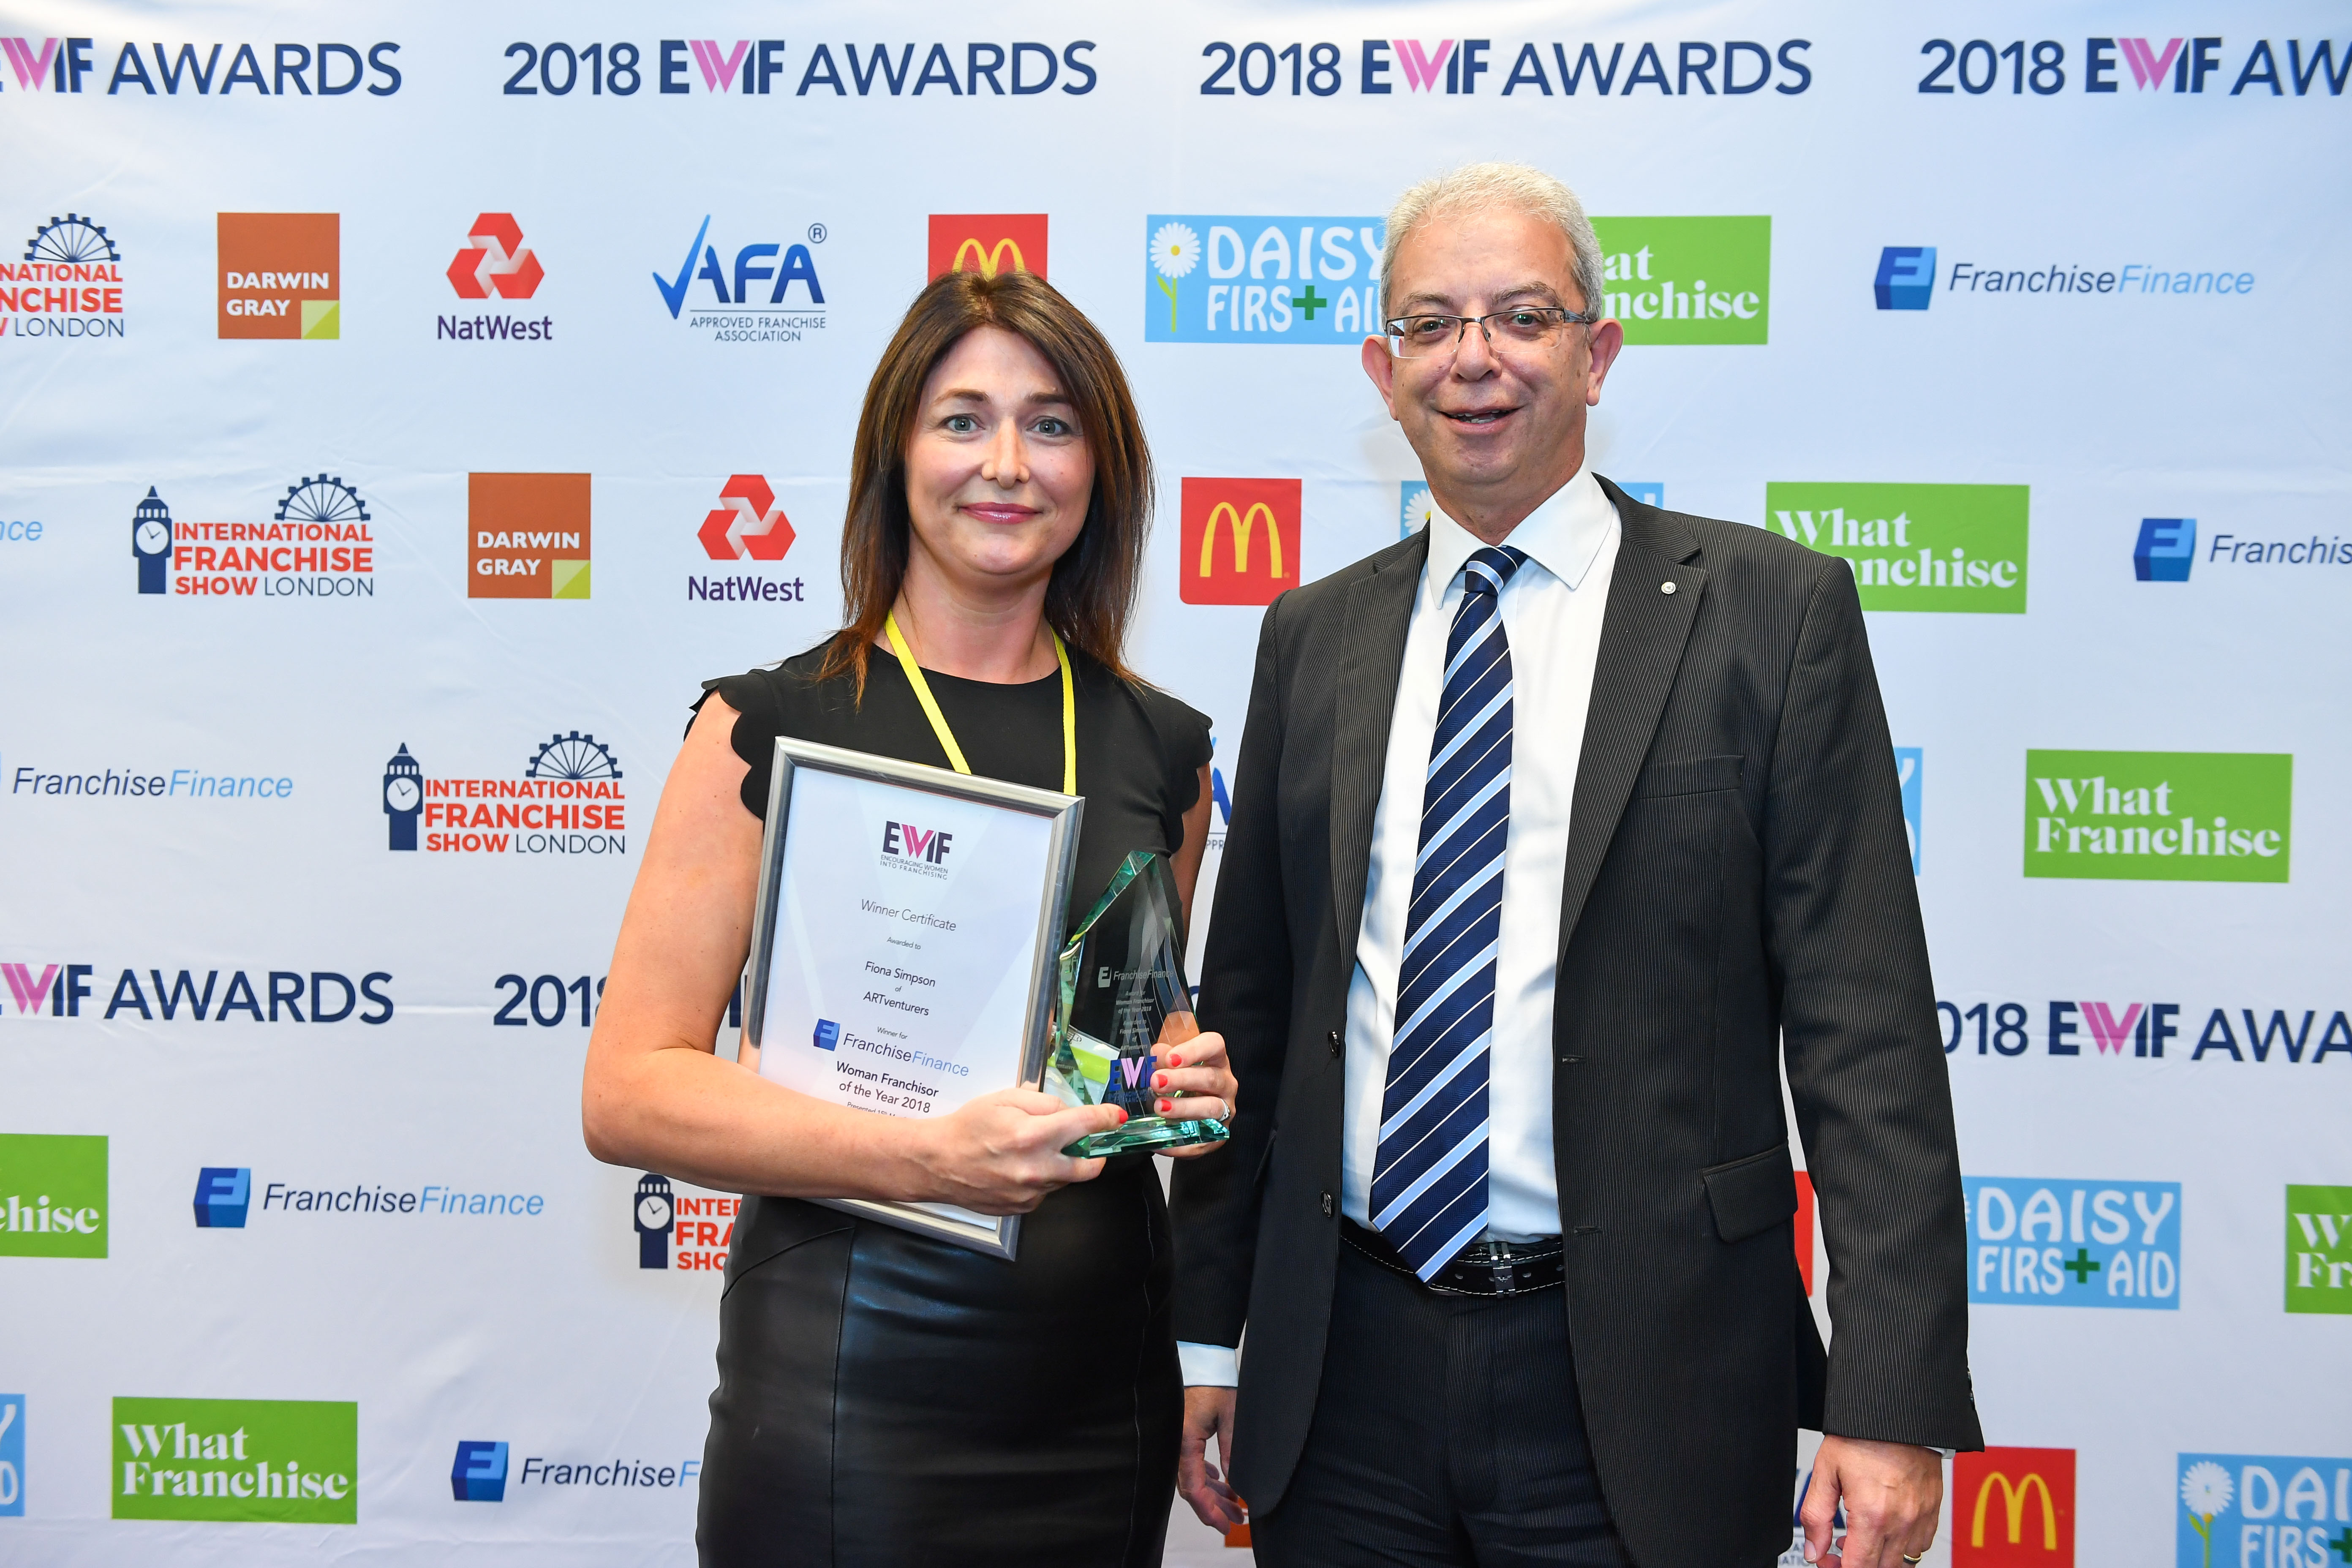 Jo Middleton, Dog First Aid – New Woman Franchisor of the Year 2018